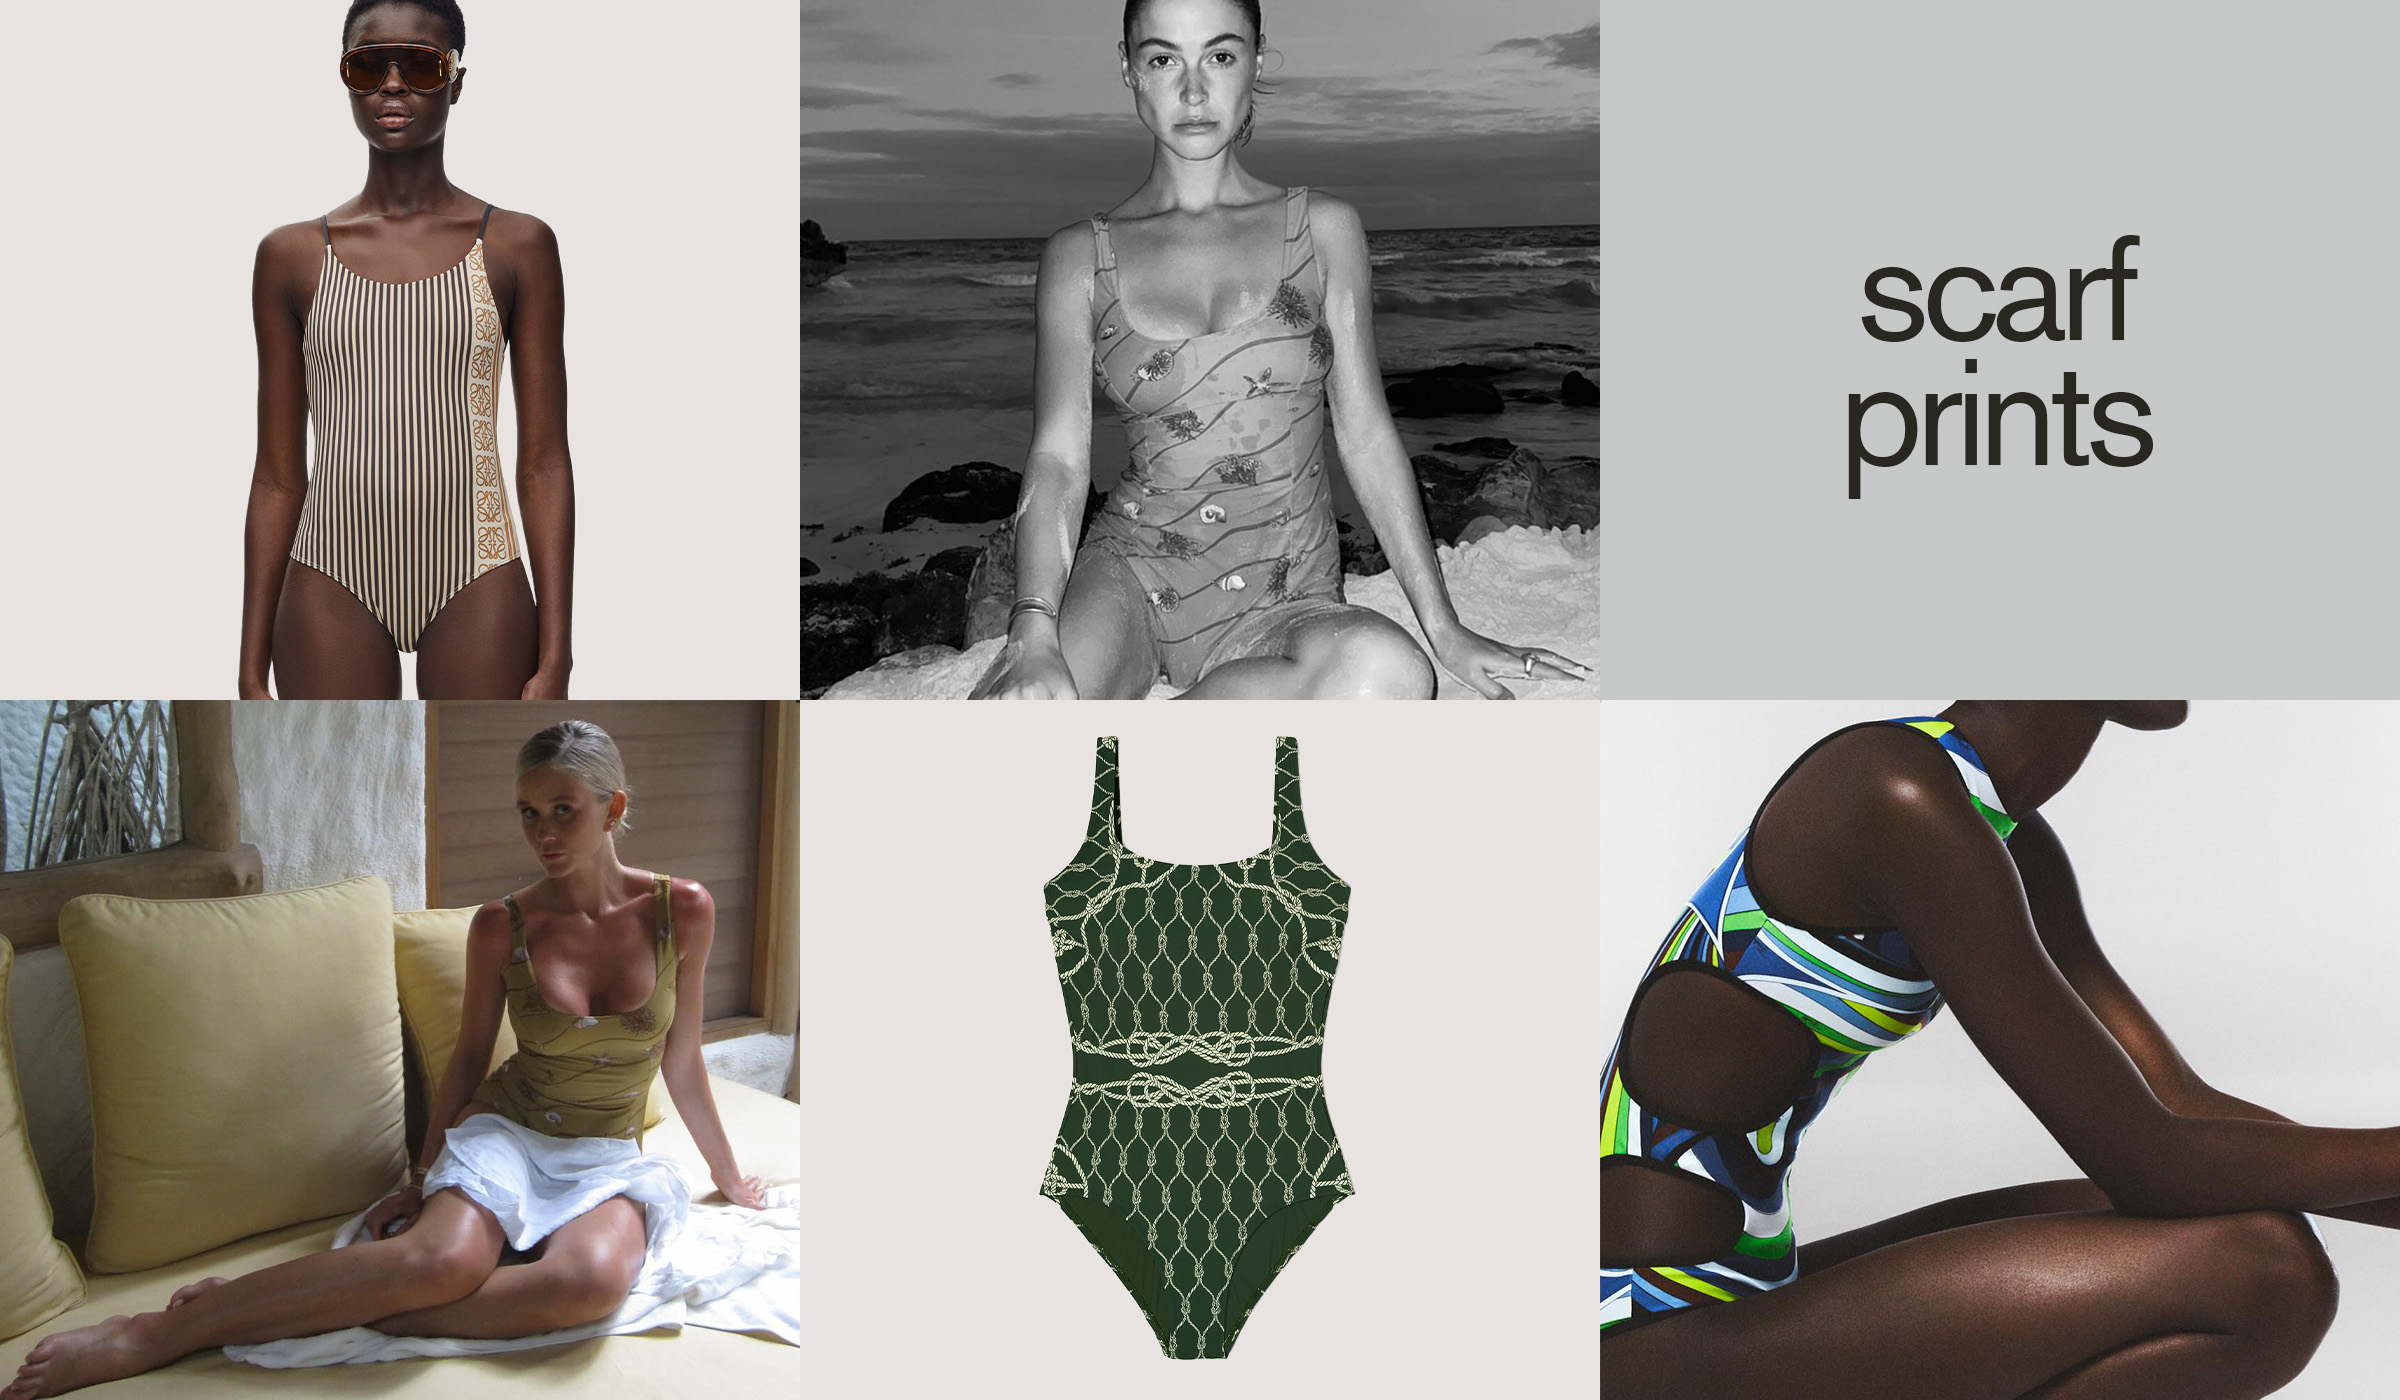 Collage of images showing scarf printed swimsuits